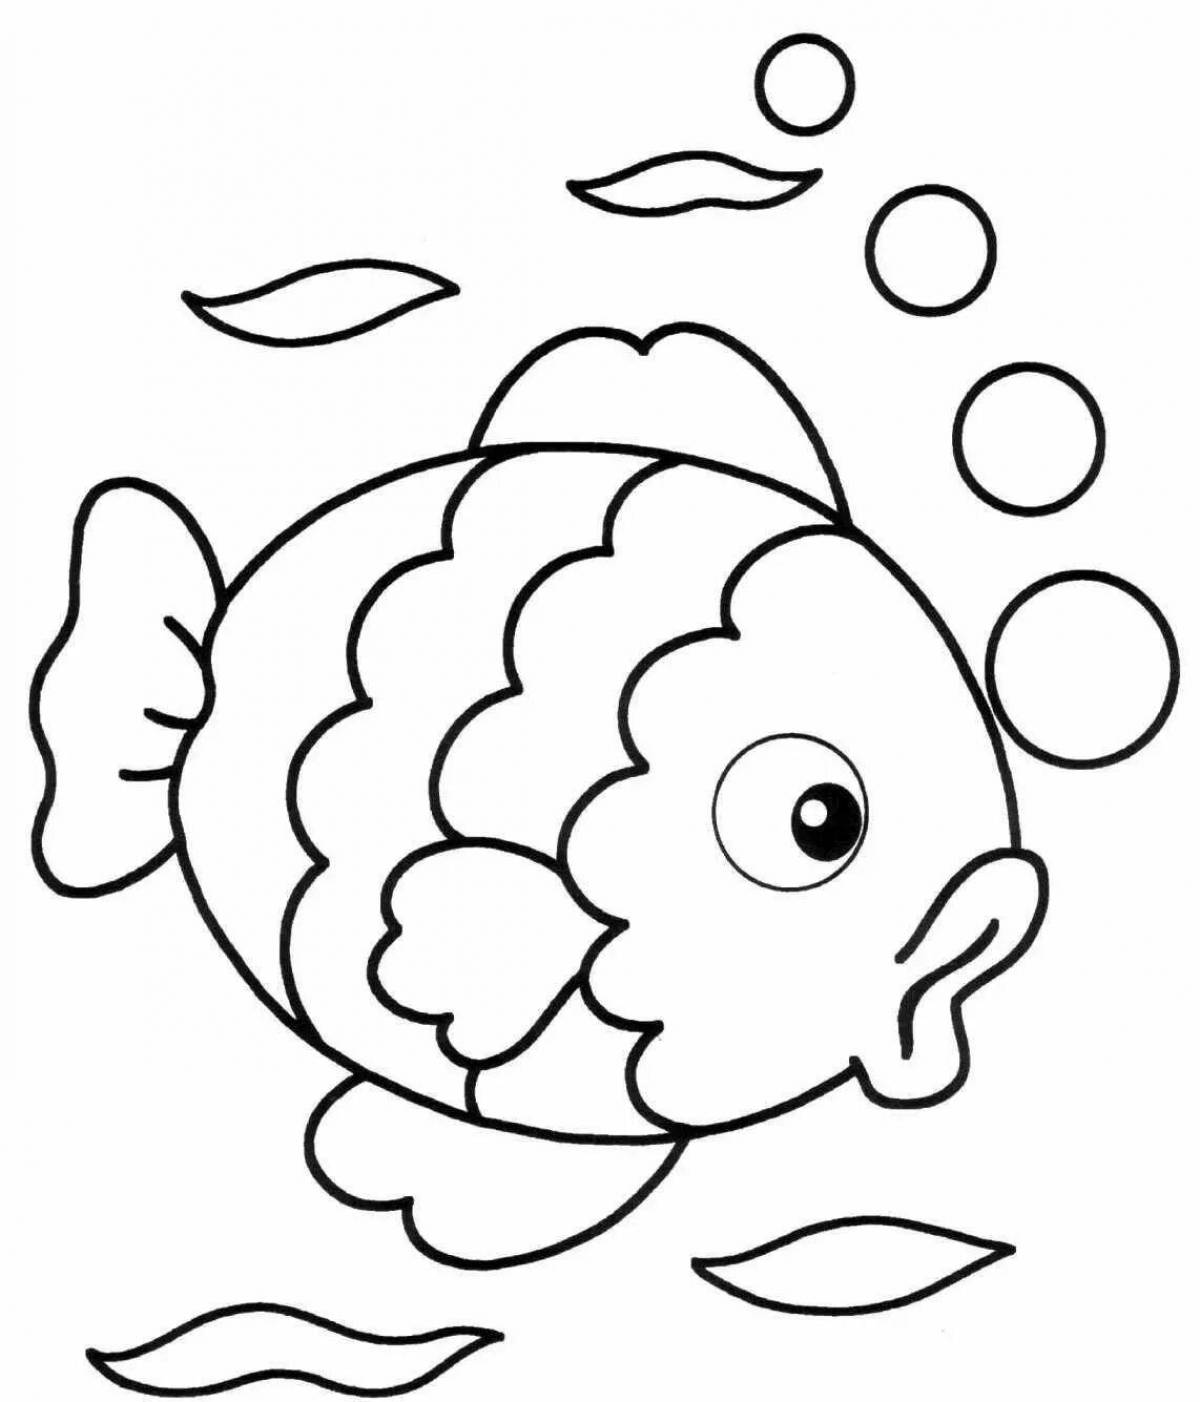 Joyful coloring book for little kids 3-4 years old